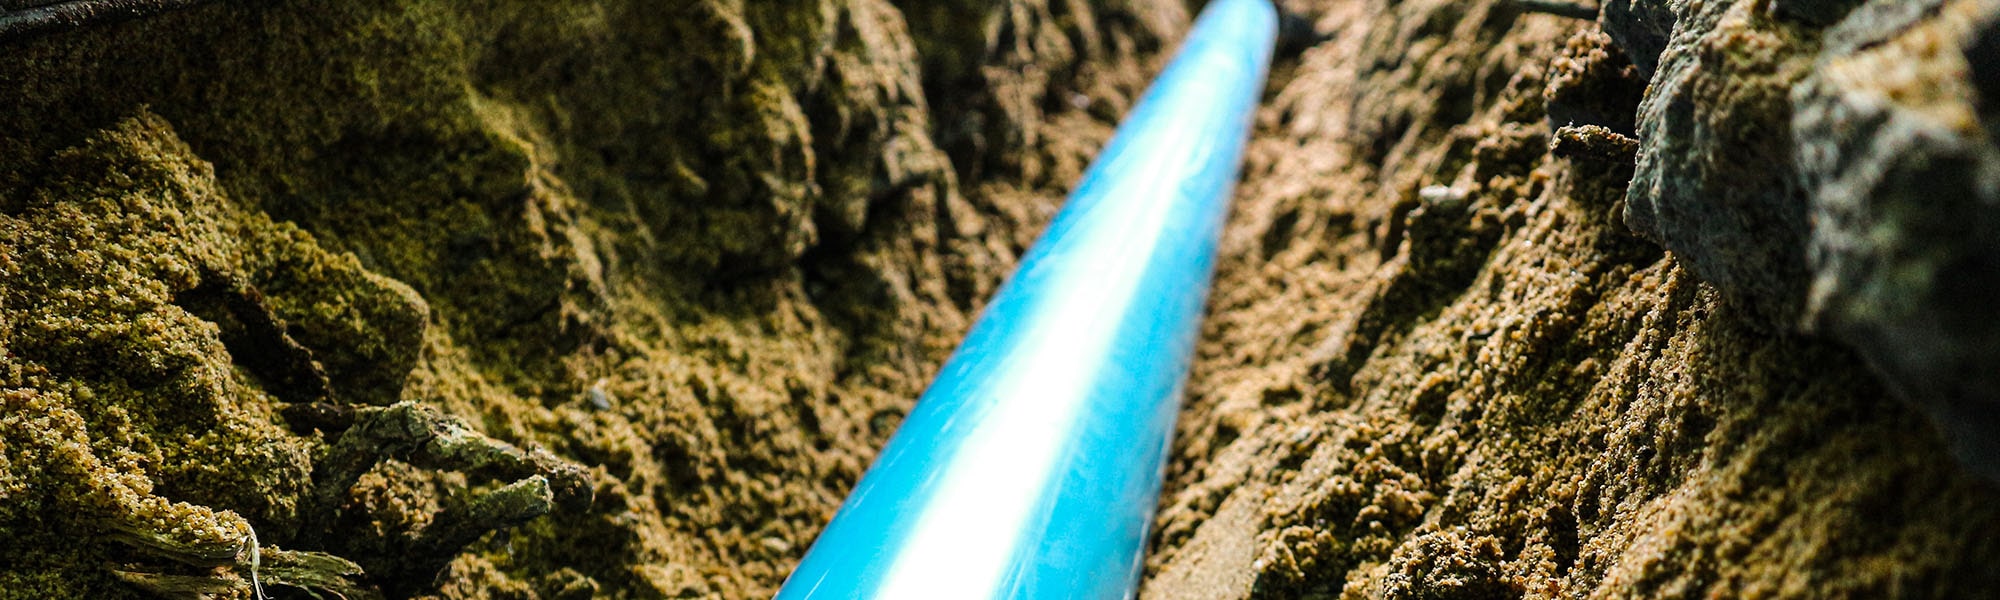 Buried blue pipe